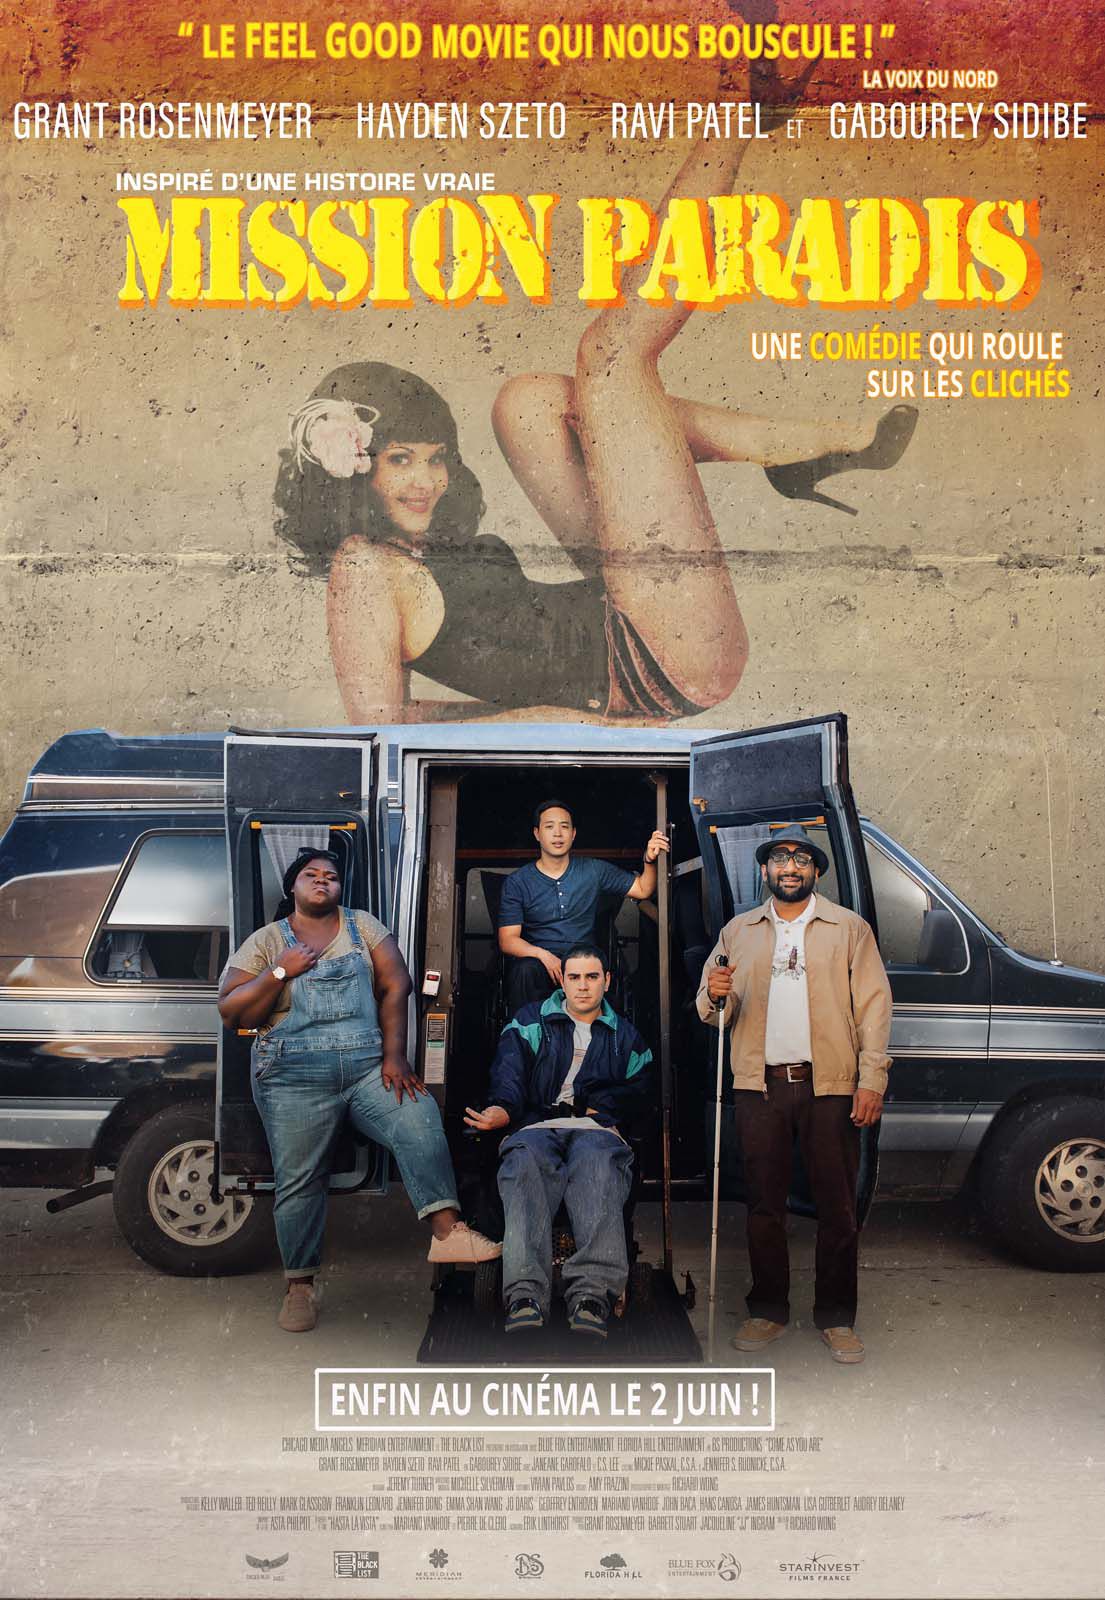 Mission Paradis - Film (2019) streaming VF gratuit complet